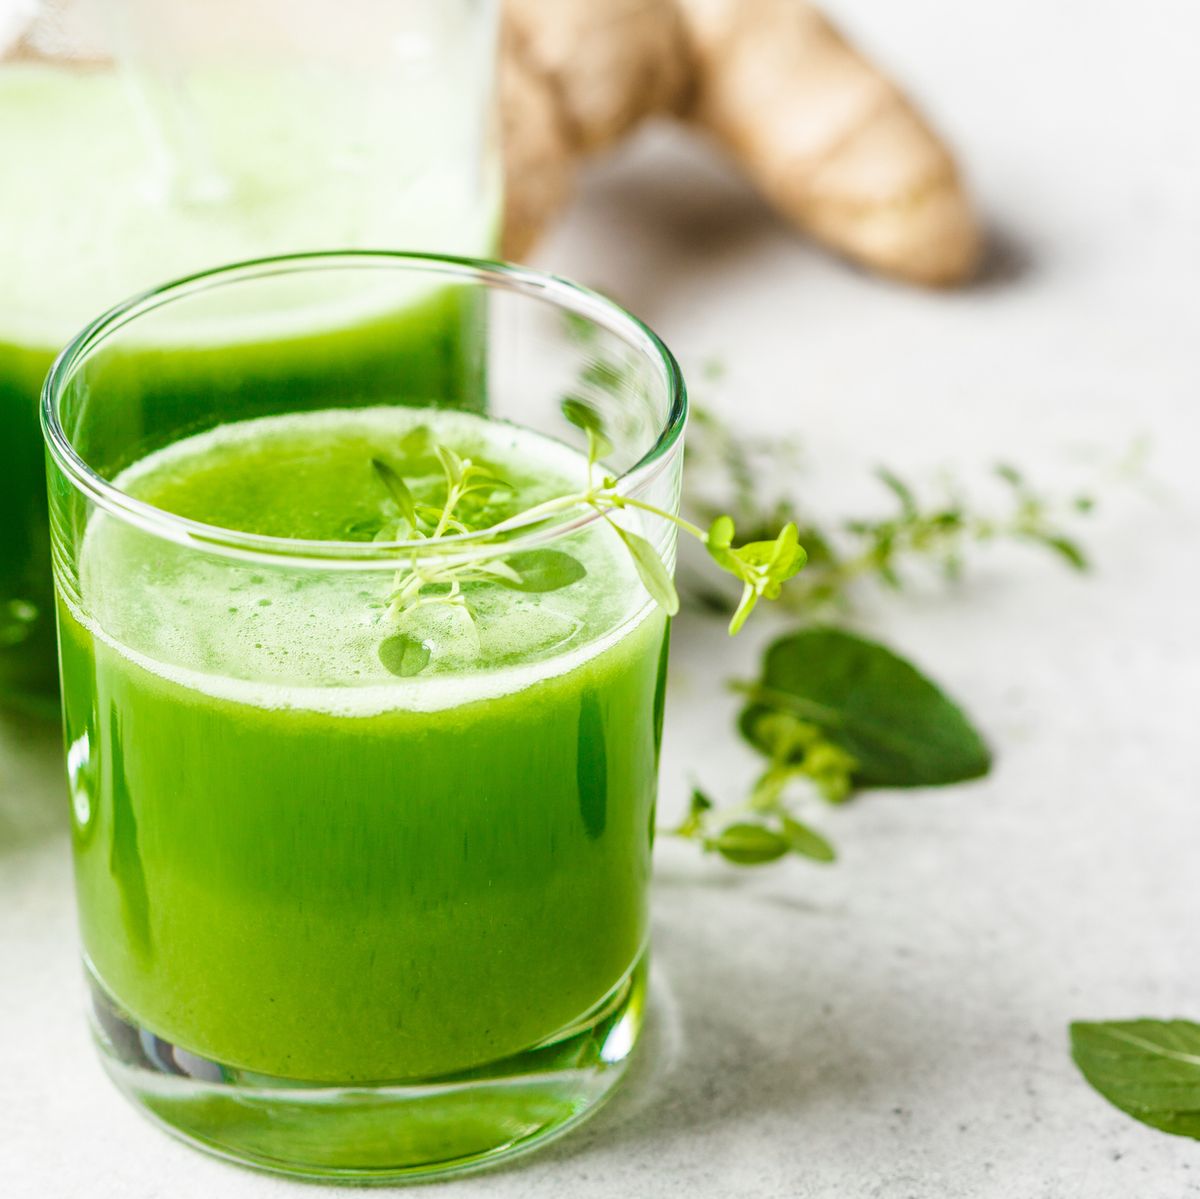 10 Day Green Smoothie Cleanse For Weight Loss: Sip Up, Slim Down